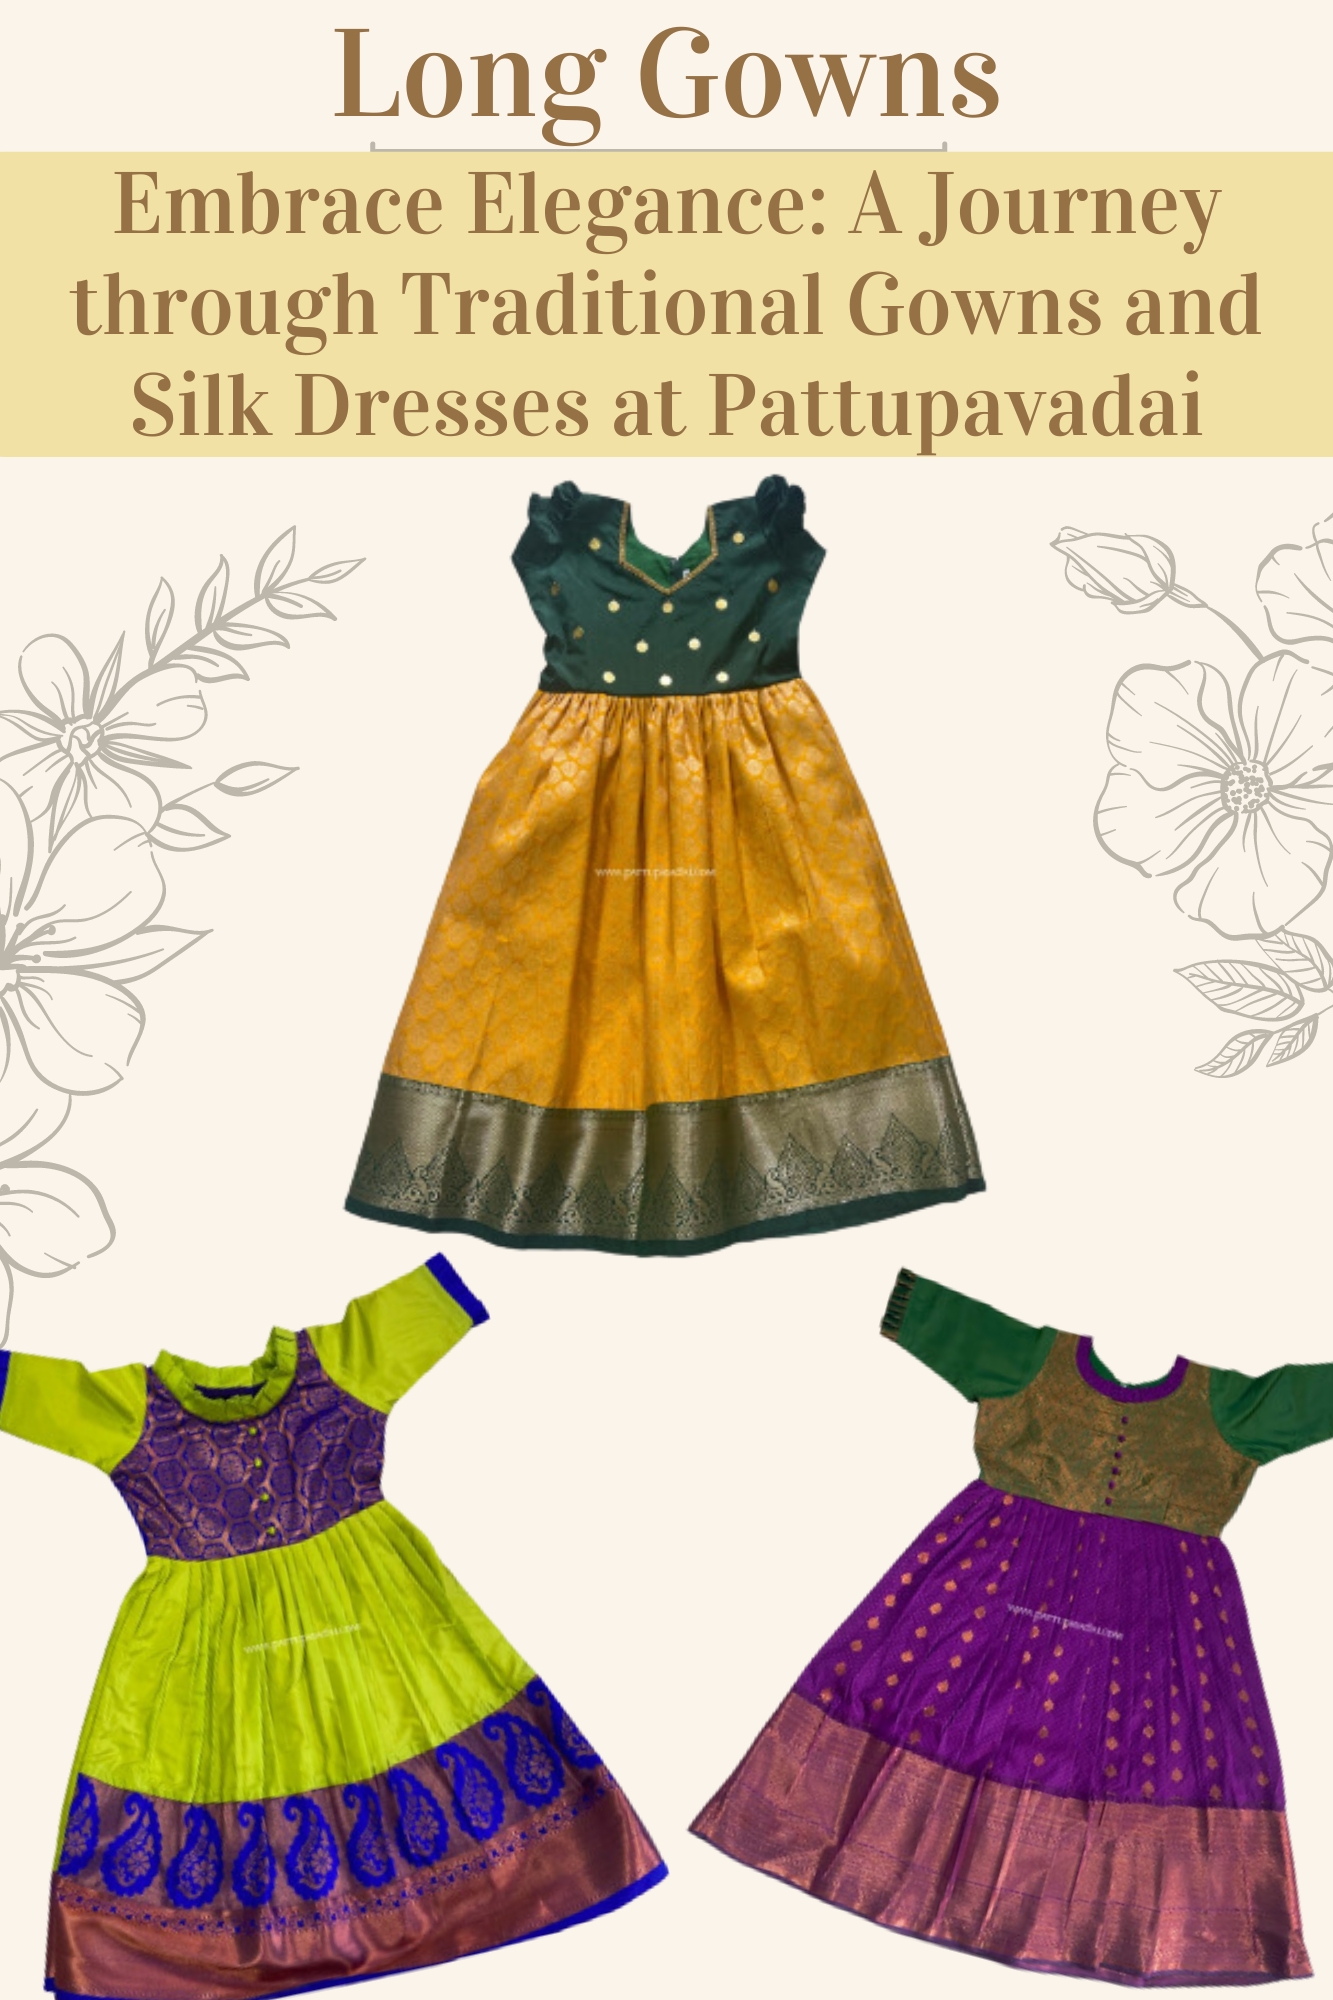 Embrace Elegance: A Journey through Traditional Gowns and Silk Dresses at Pattupavadai